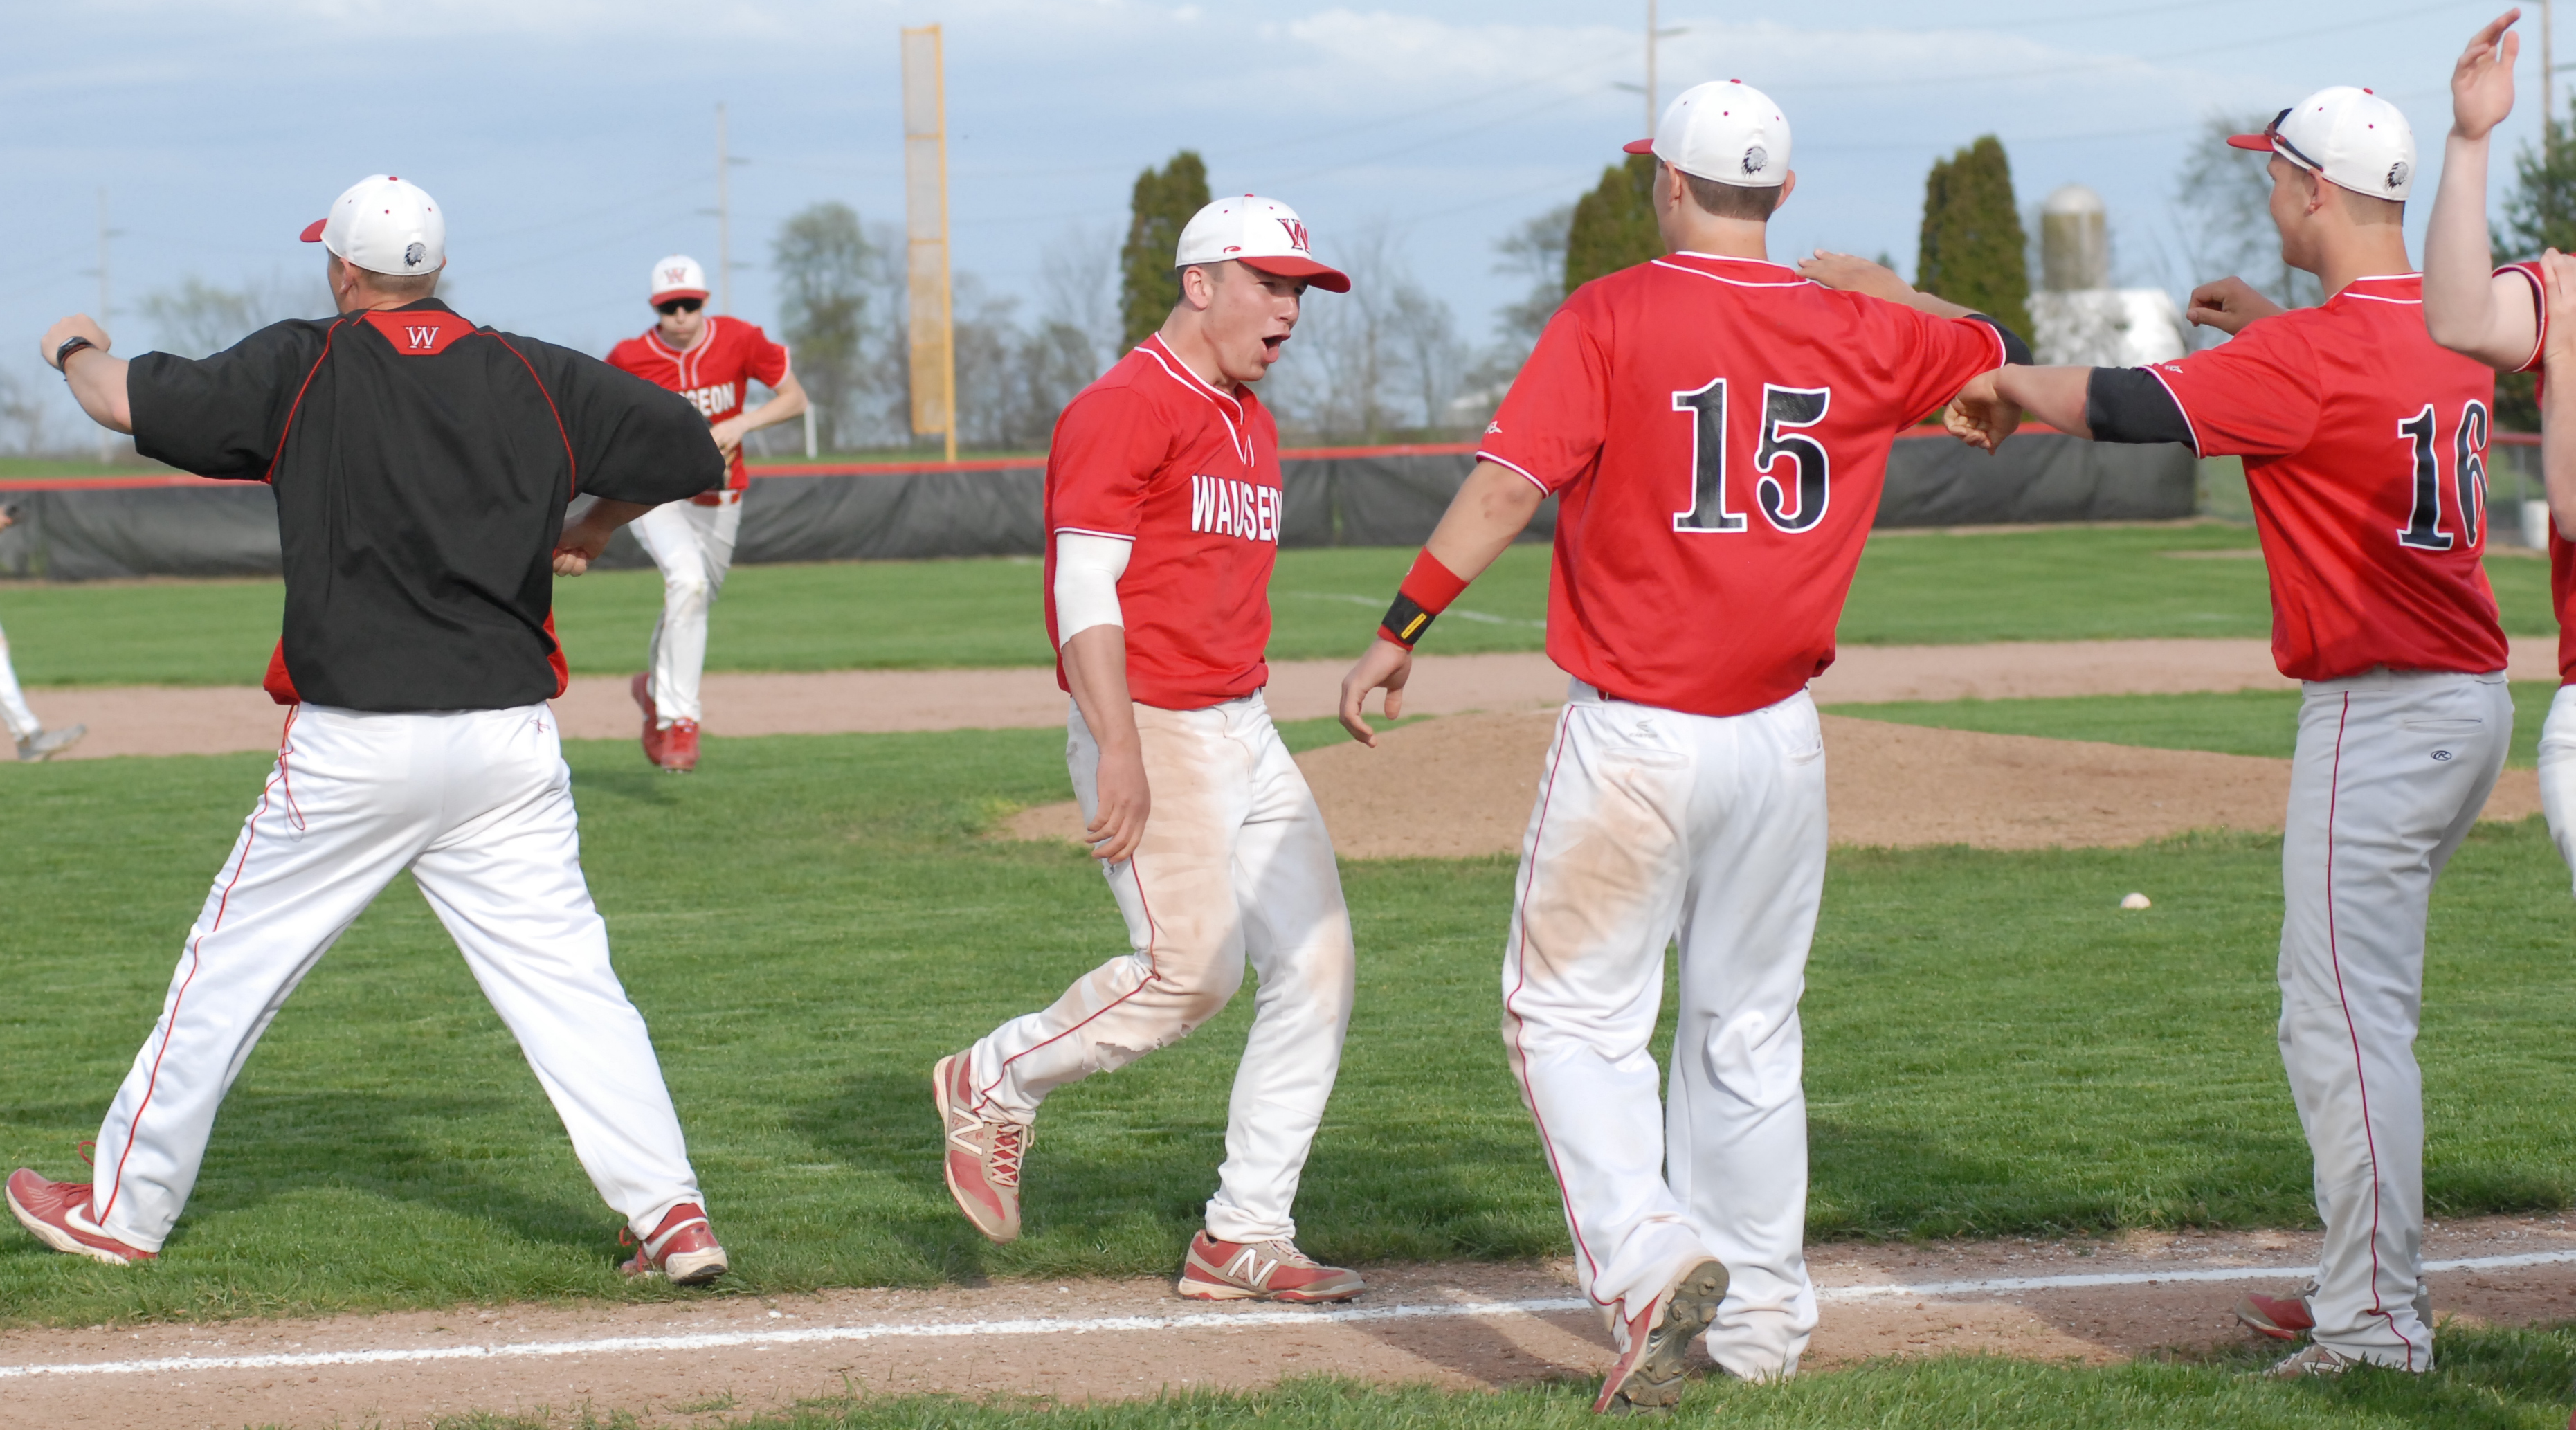 Ty Suntken and Wauseon celebrating victory after ending the game with a 6-3 double play